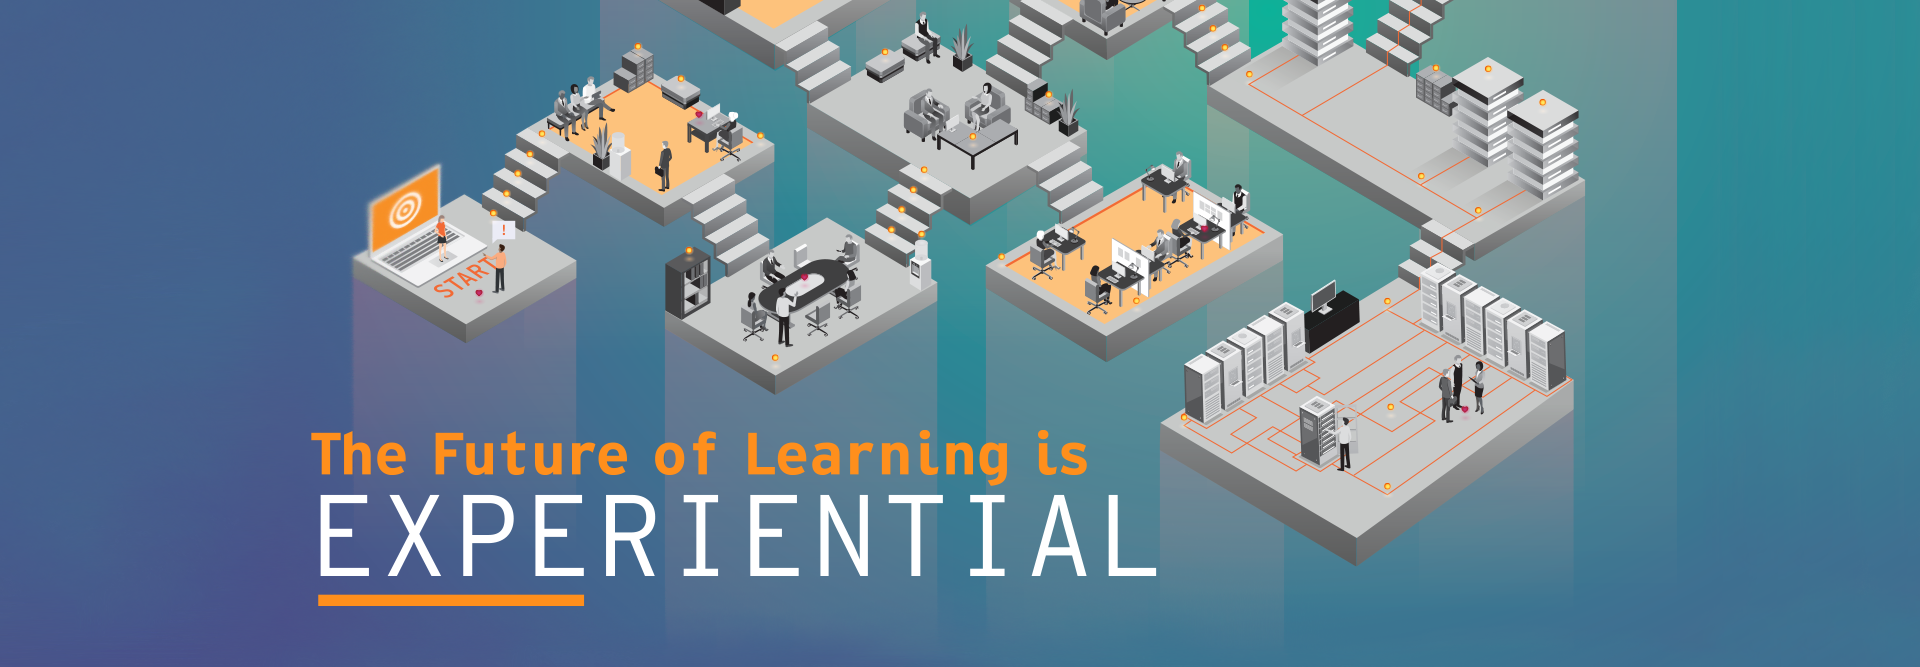 The Future of Learning Is Experiential